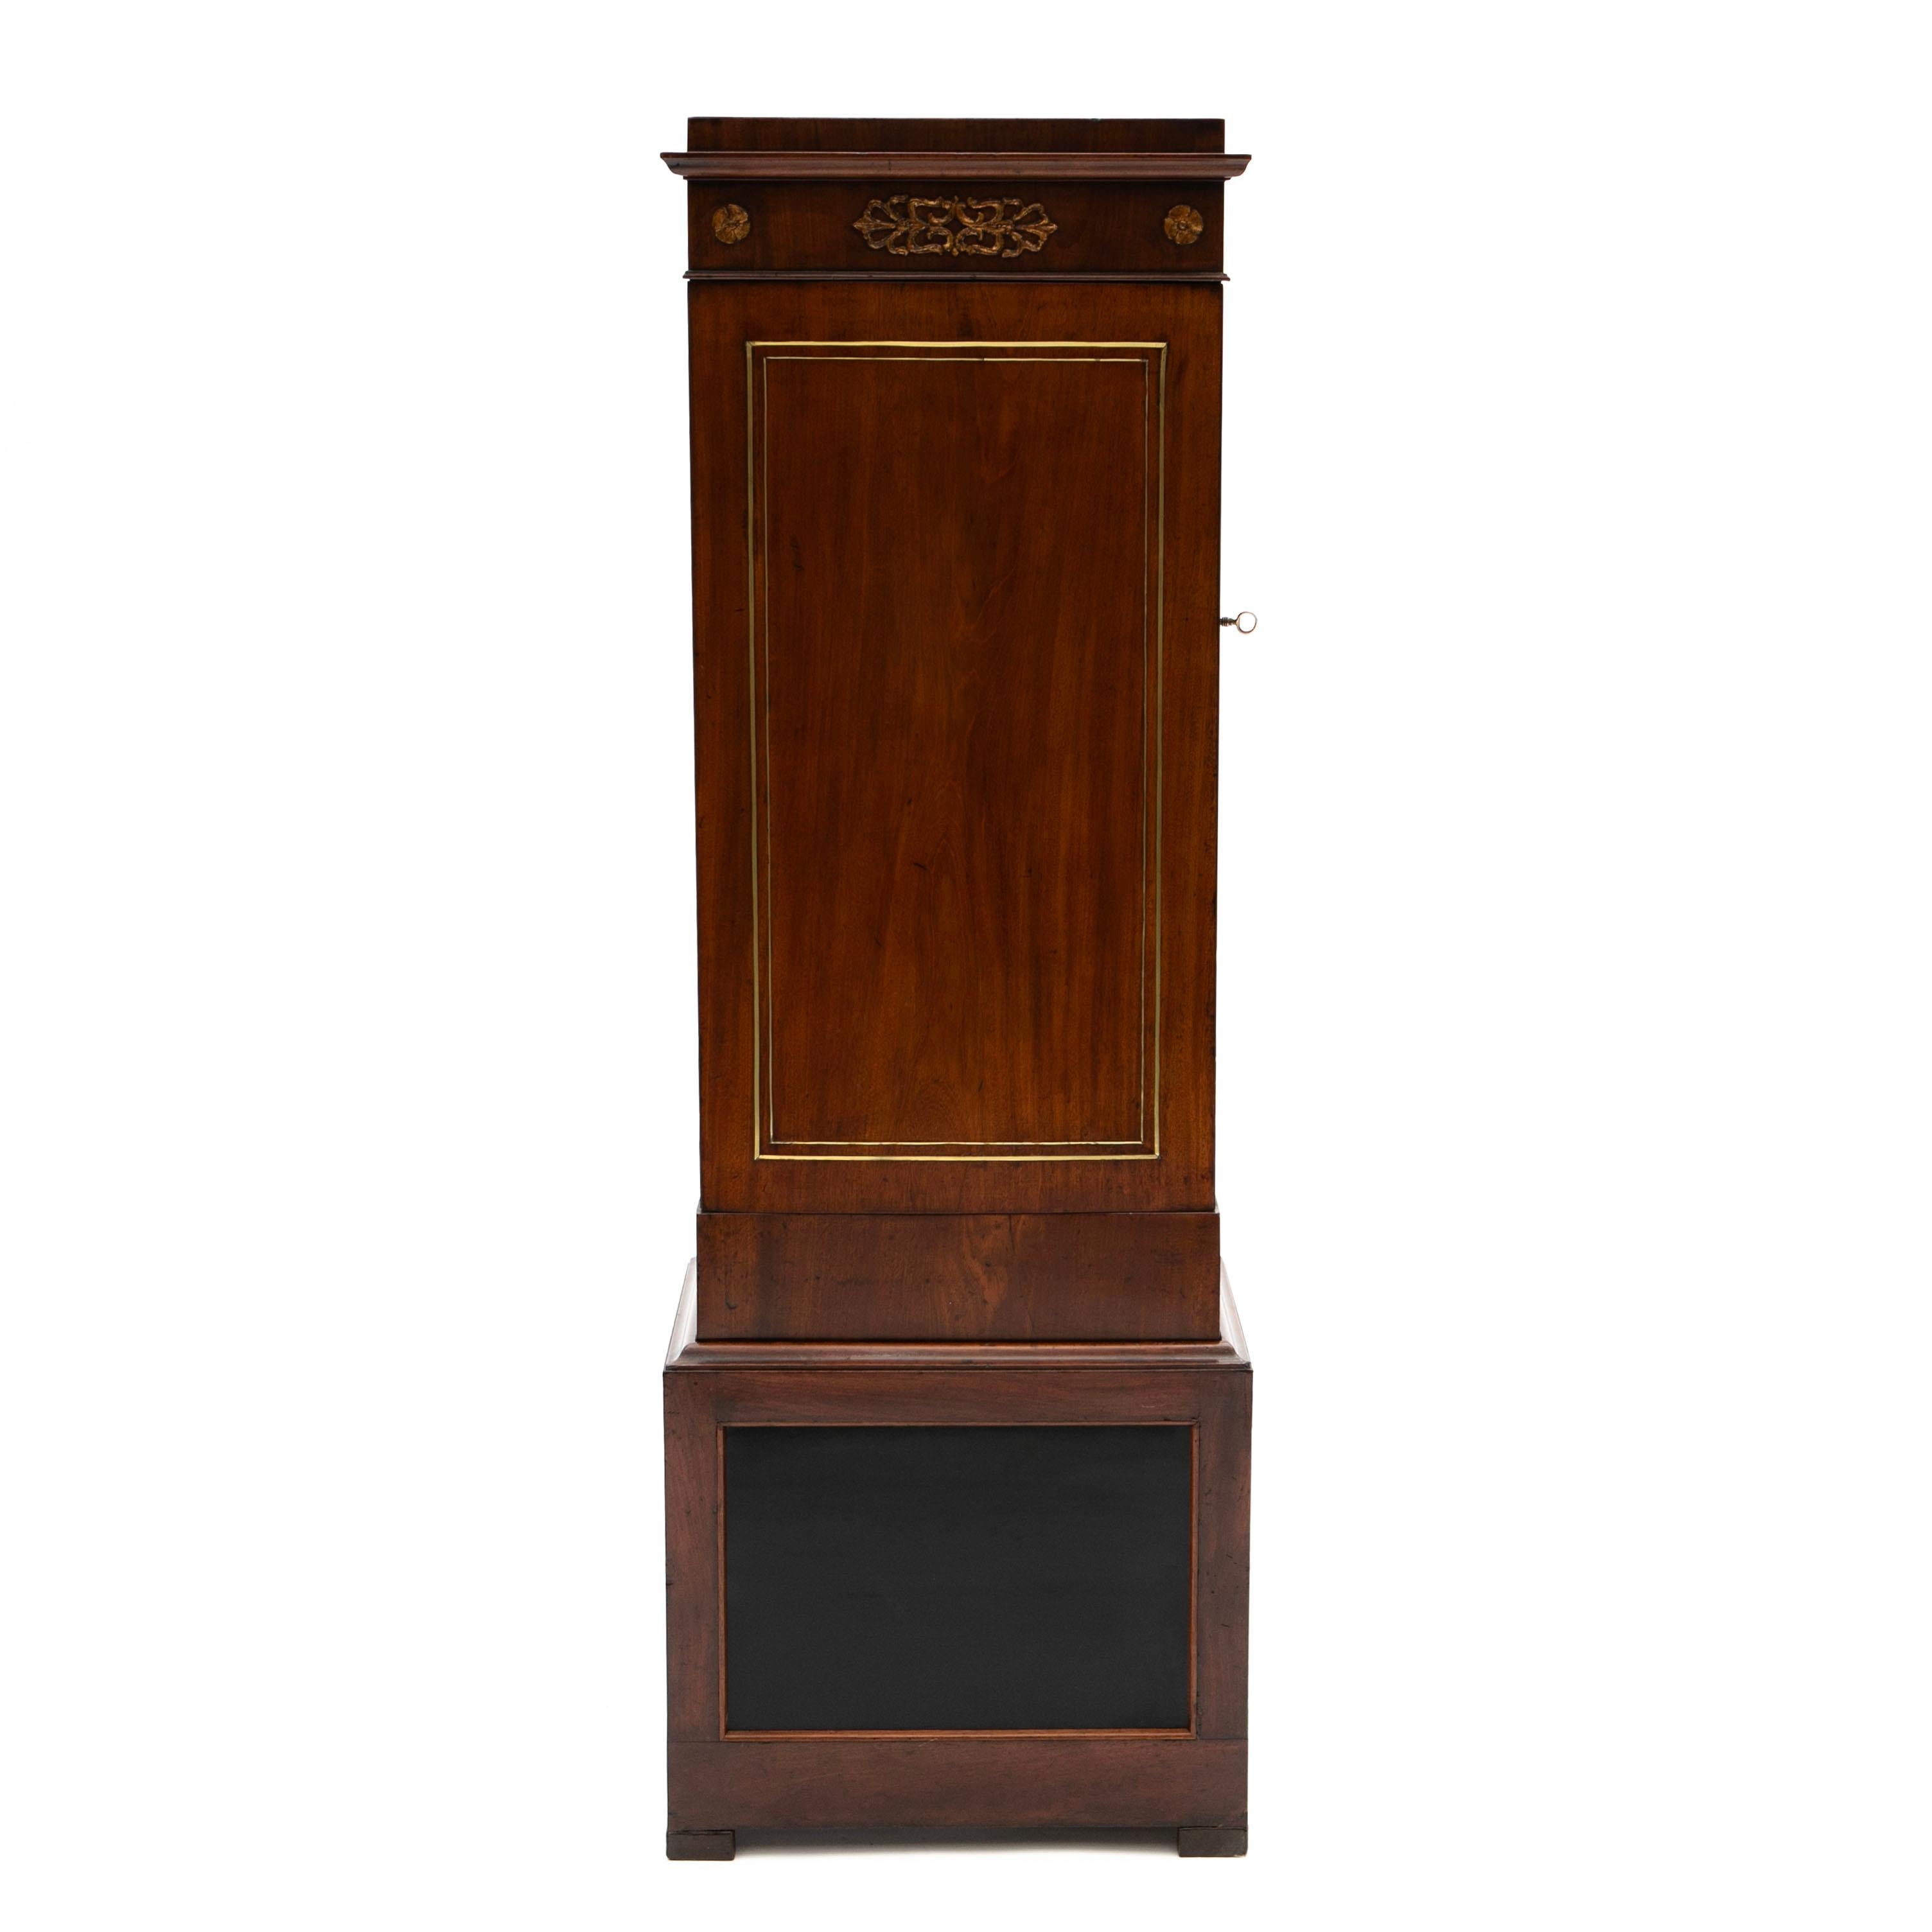 Elegant, architectural Empire pedestal cabinet in 2 parts, crafted in mahogany.
Features a frieze with ormolu mounts of typical Empire period over a cupboard door that opens to reveal a shelved interior and the whole raised on a on a tall pedestal